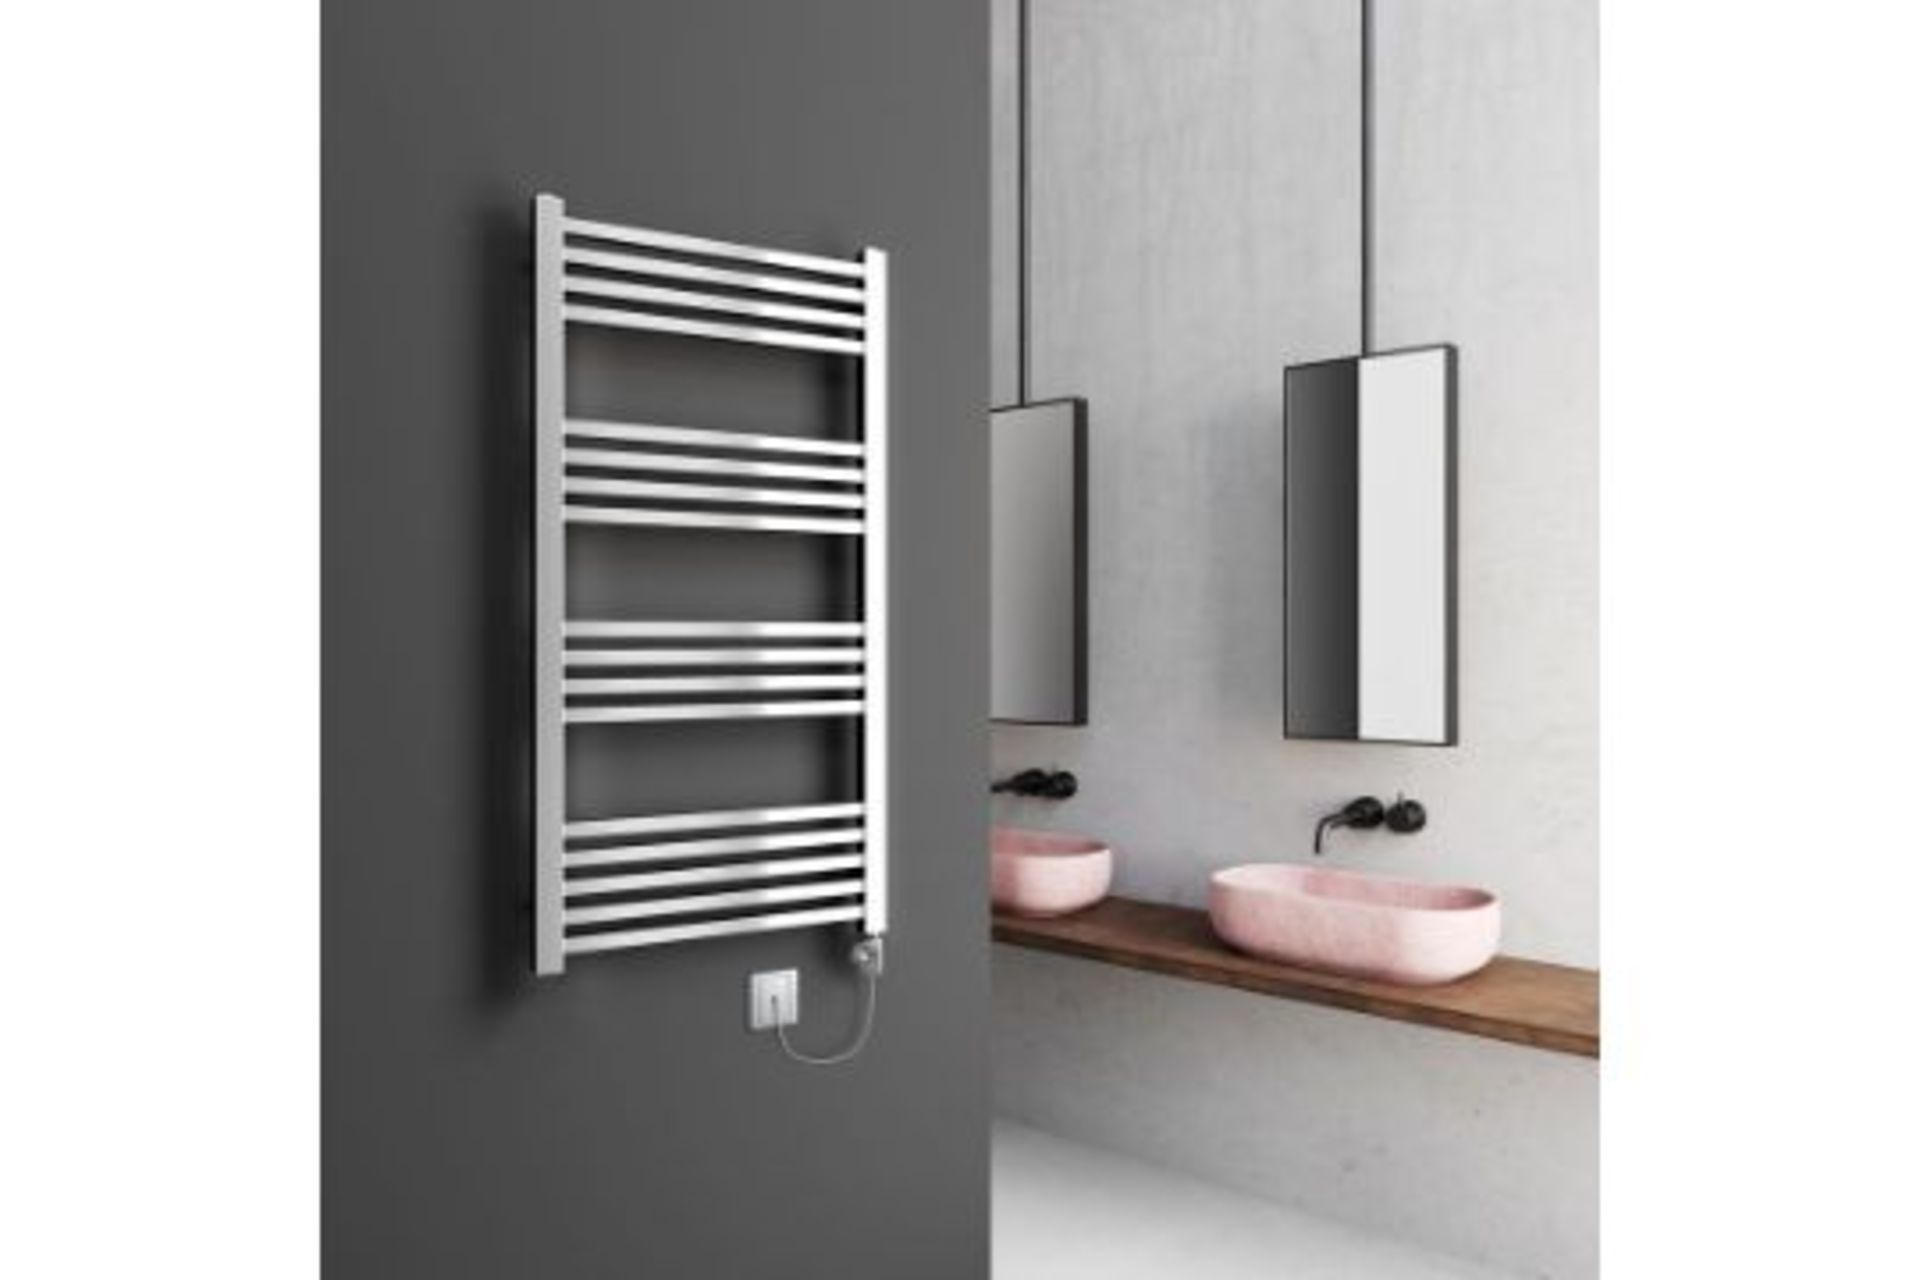 BRAND NEW BOXED PORCELANOSA NOKEN 1100x500MM ELECTRIC TOWEL RADIATOR WITH FIXINGS AND HEATING